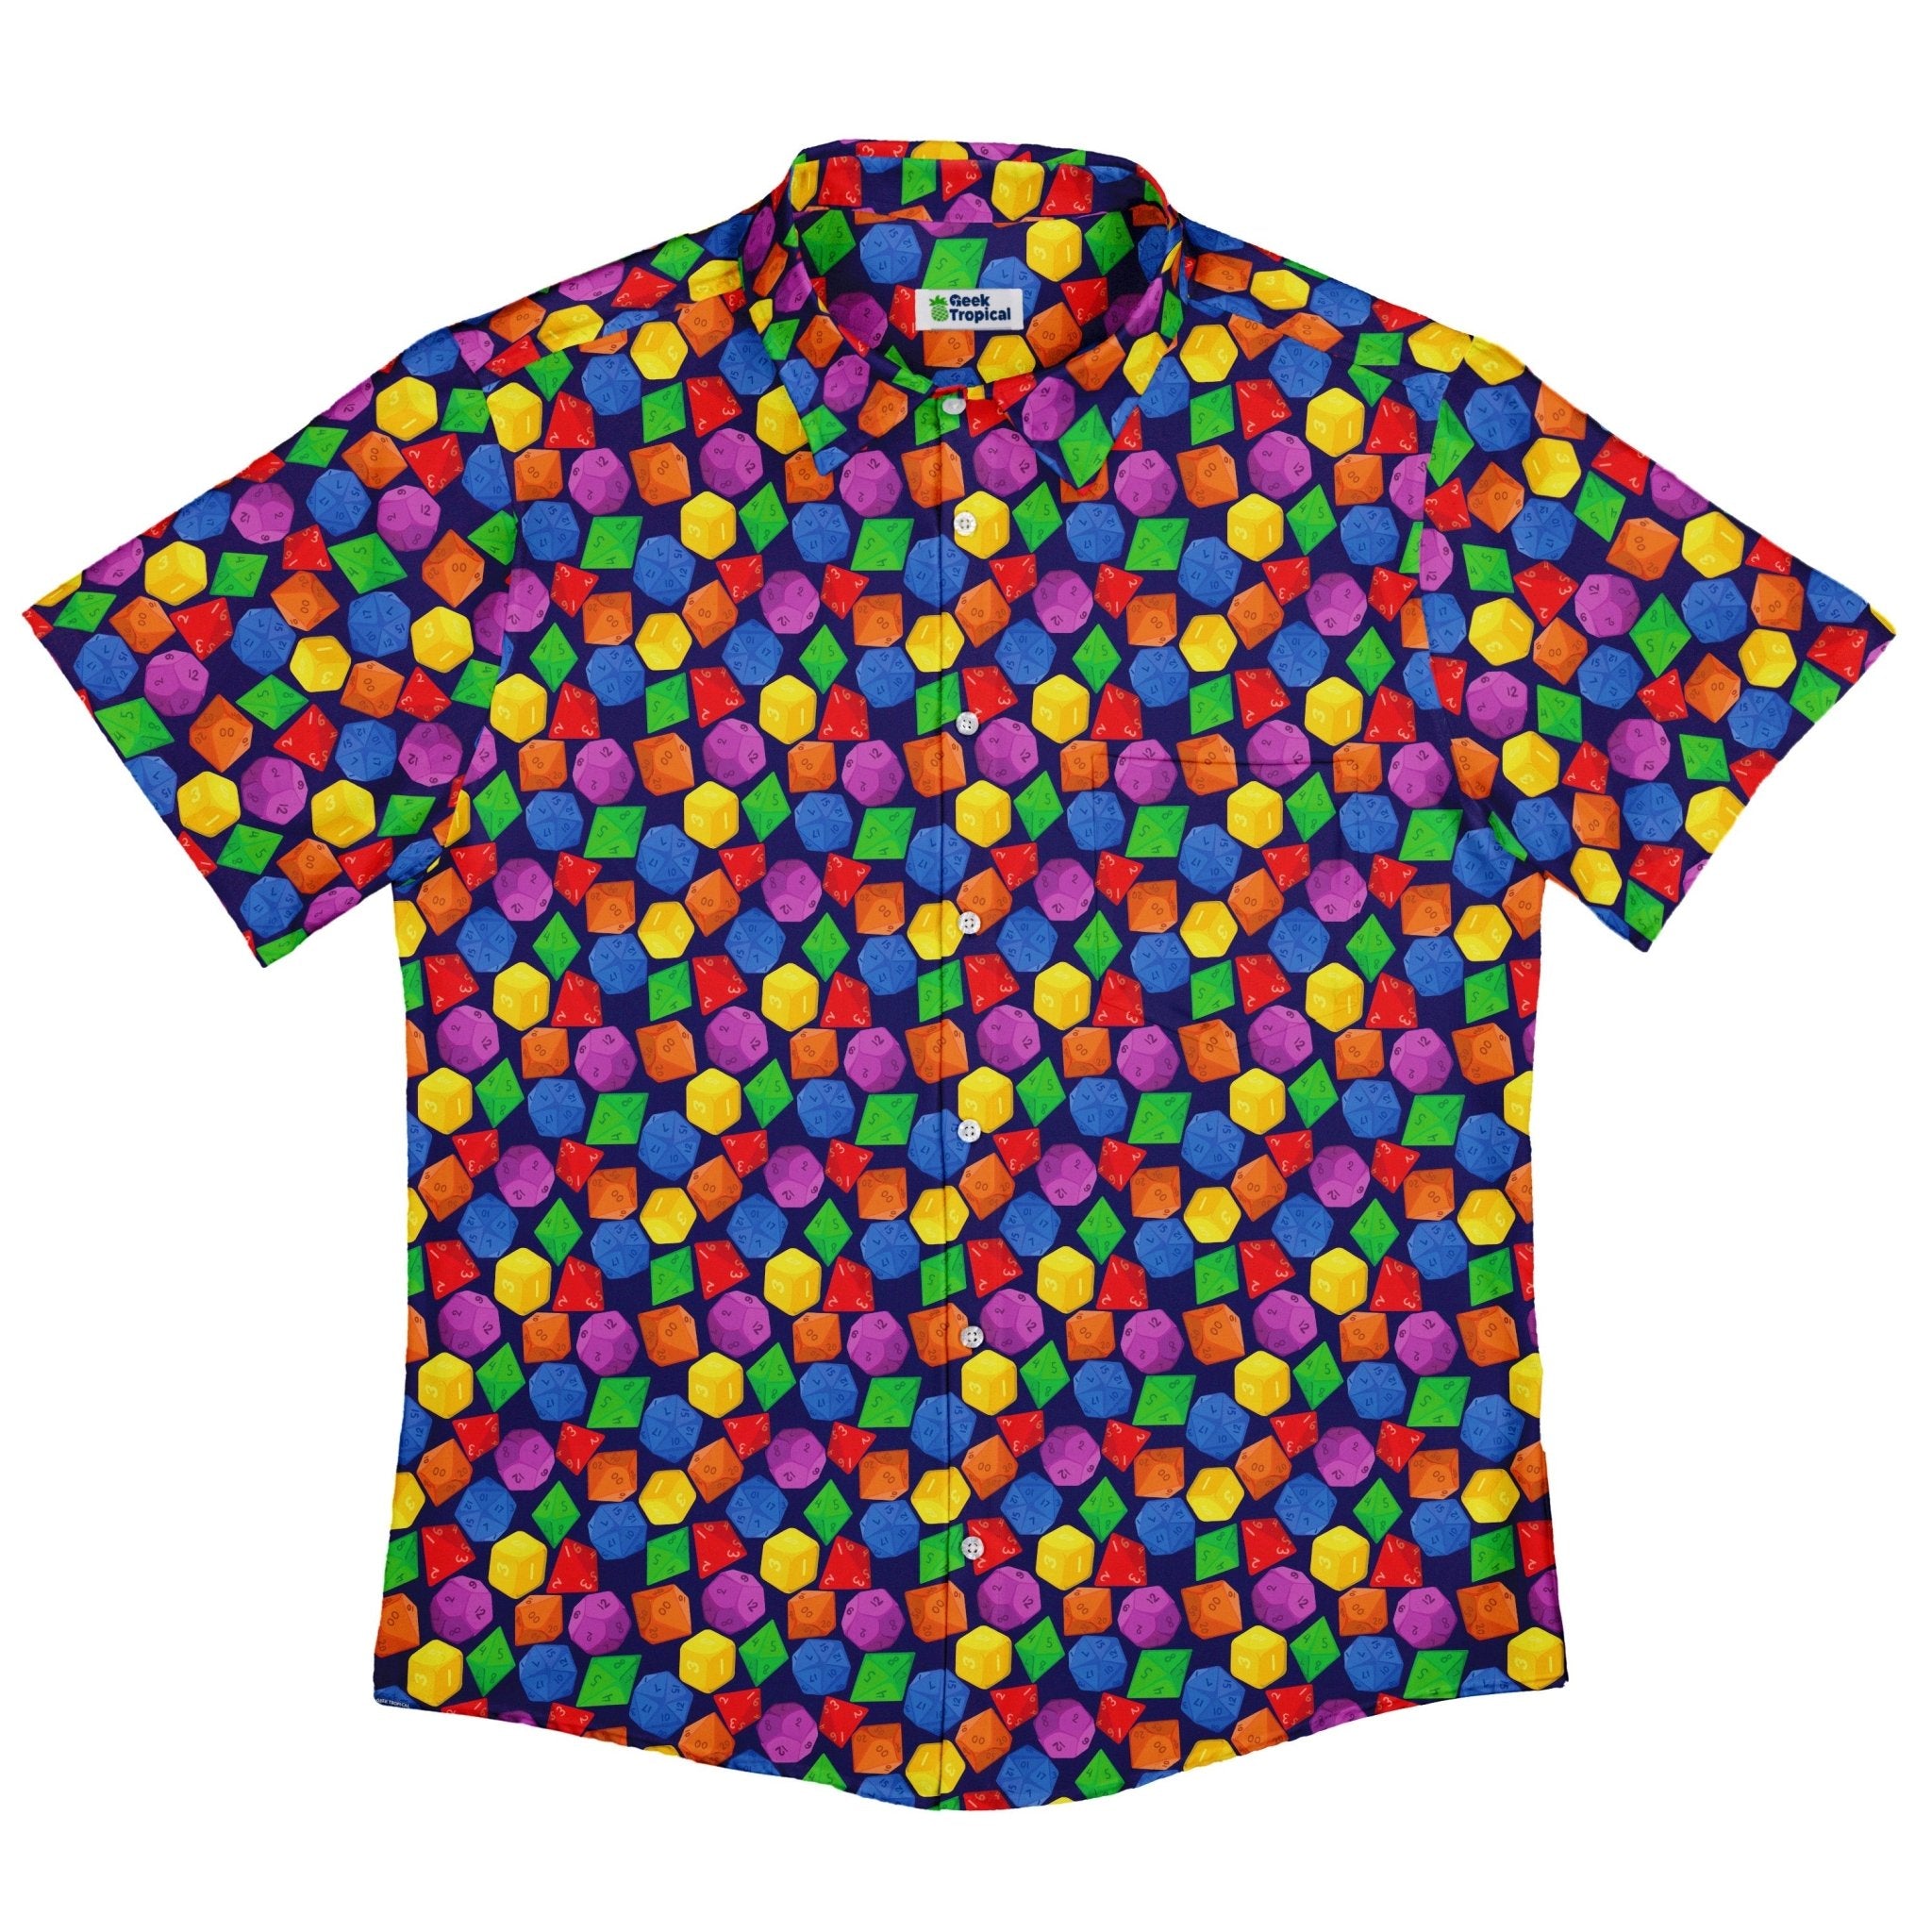 Colorful RPG Dice Pattern Blue Dnd Button Up Shirt - adult sizing - dnd & rpg print - Maximalist Patterns